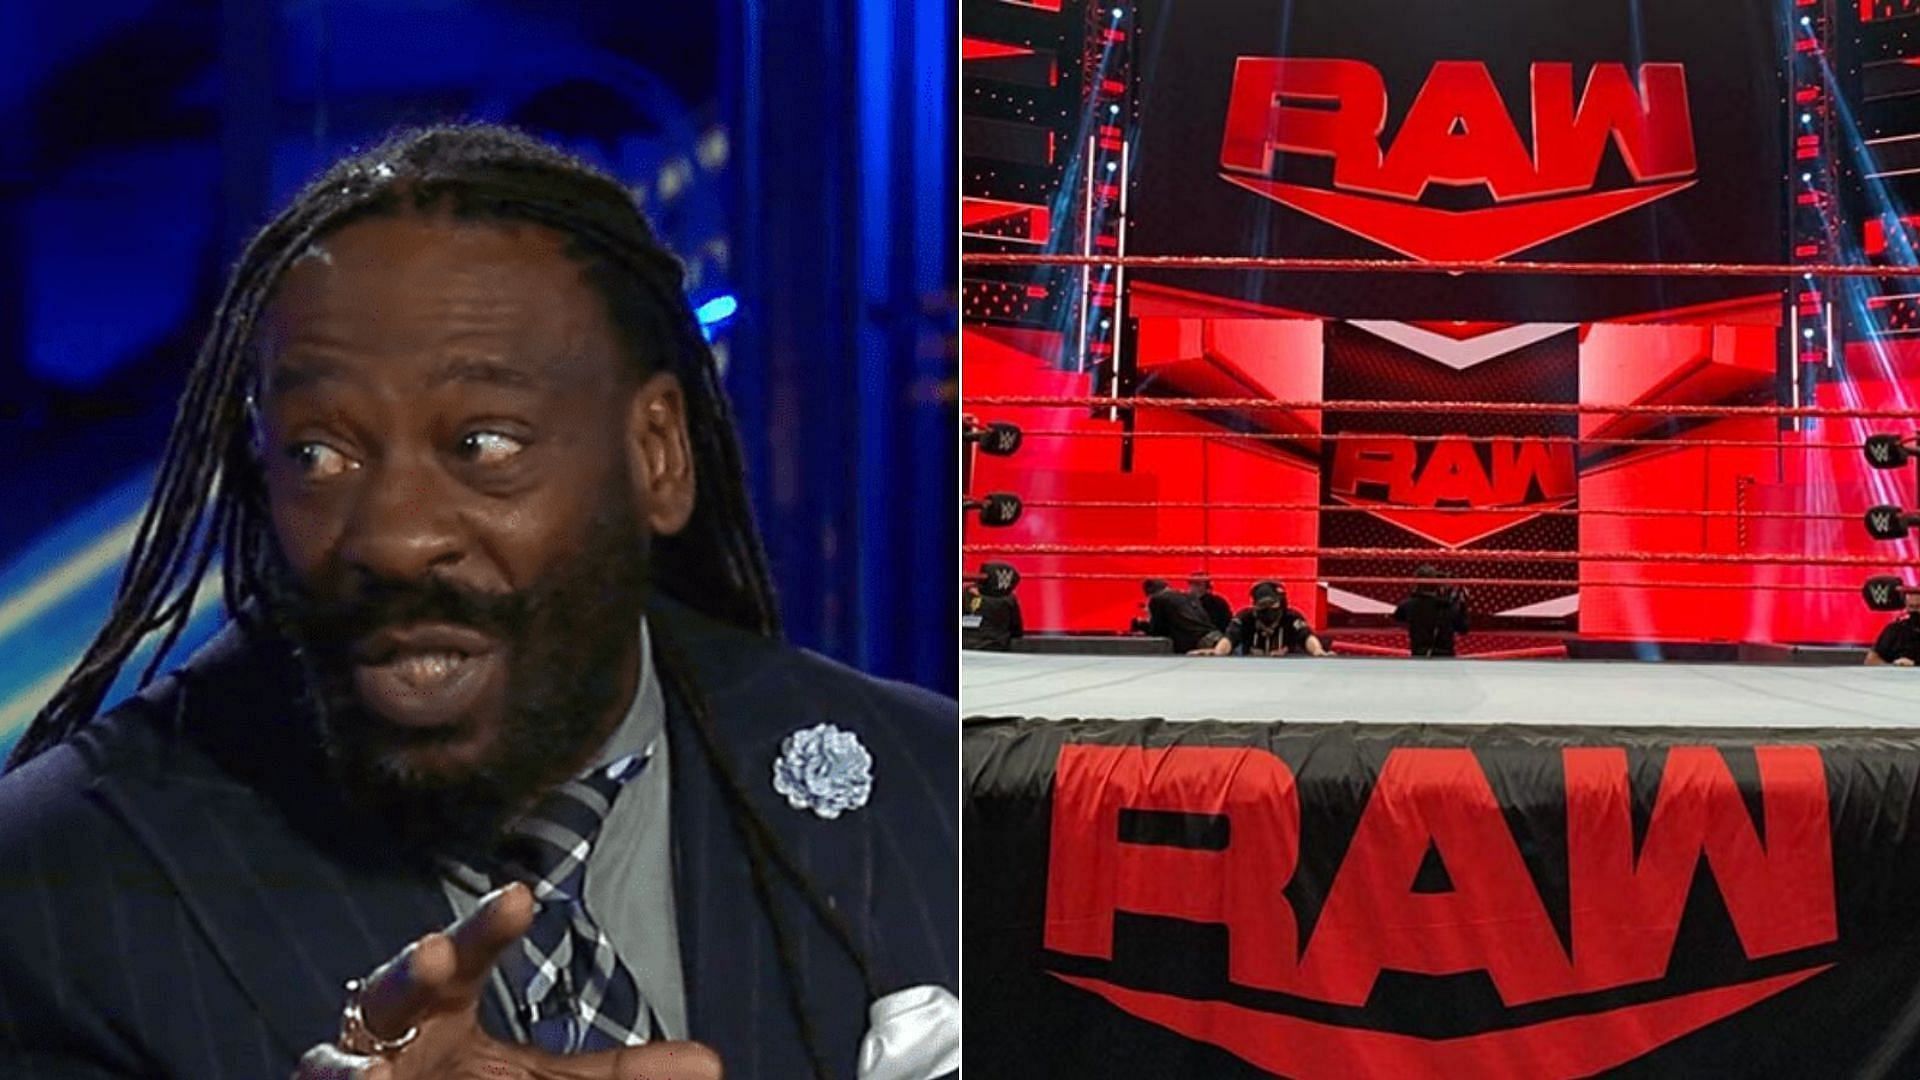 Booker T feels there may have been an issue in a RAW match